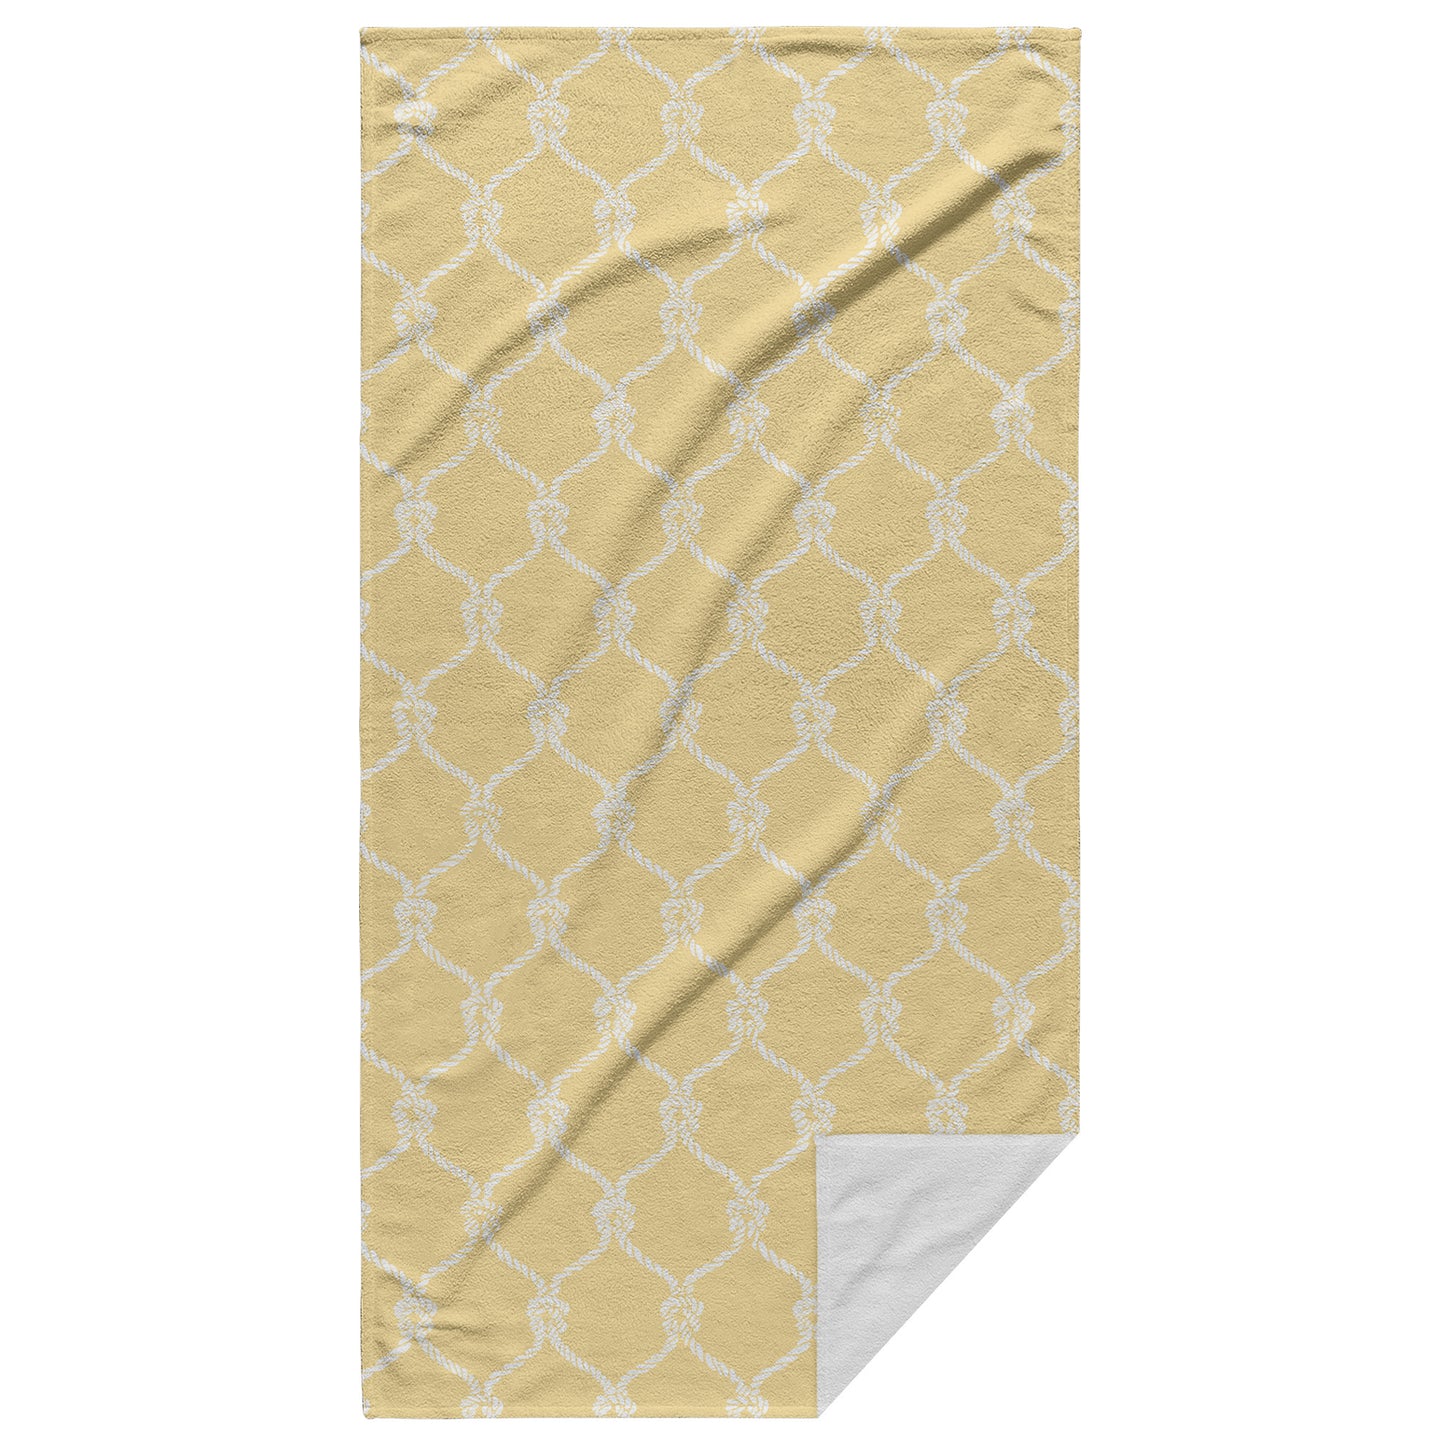 Nautical Netting Sketches on Yellow Background, Beach Towel